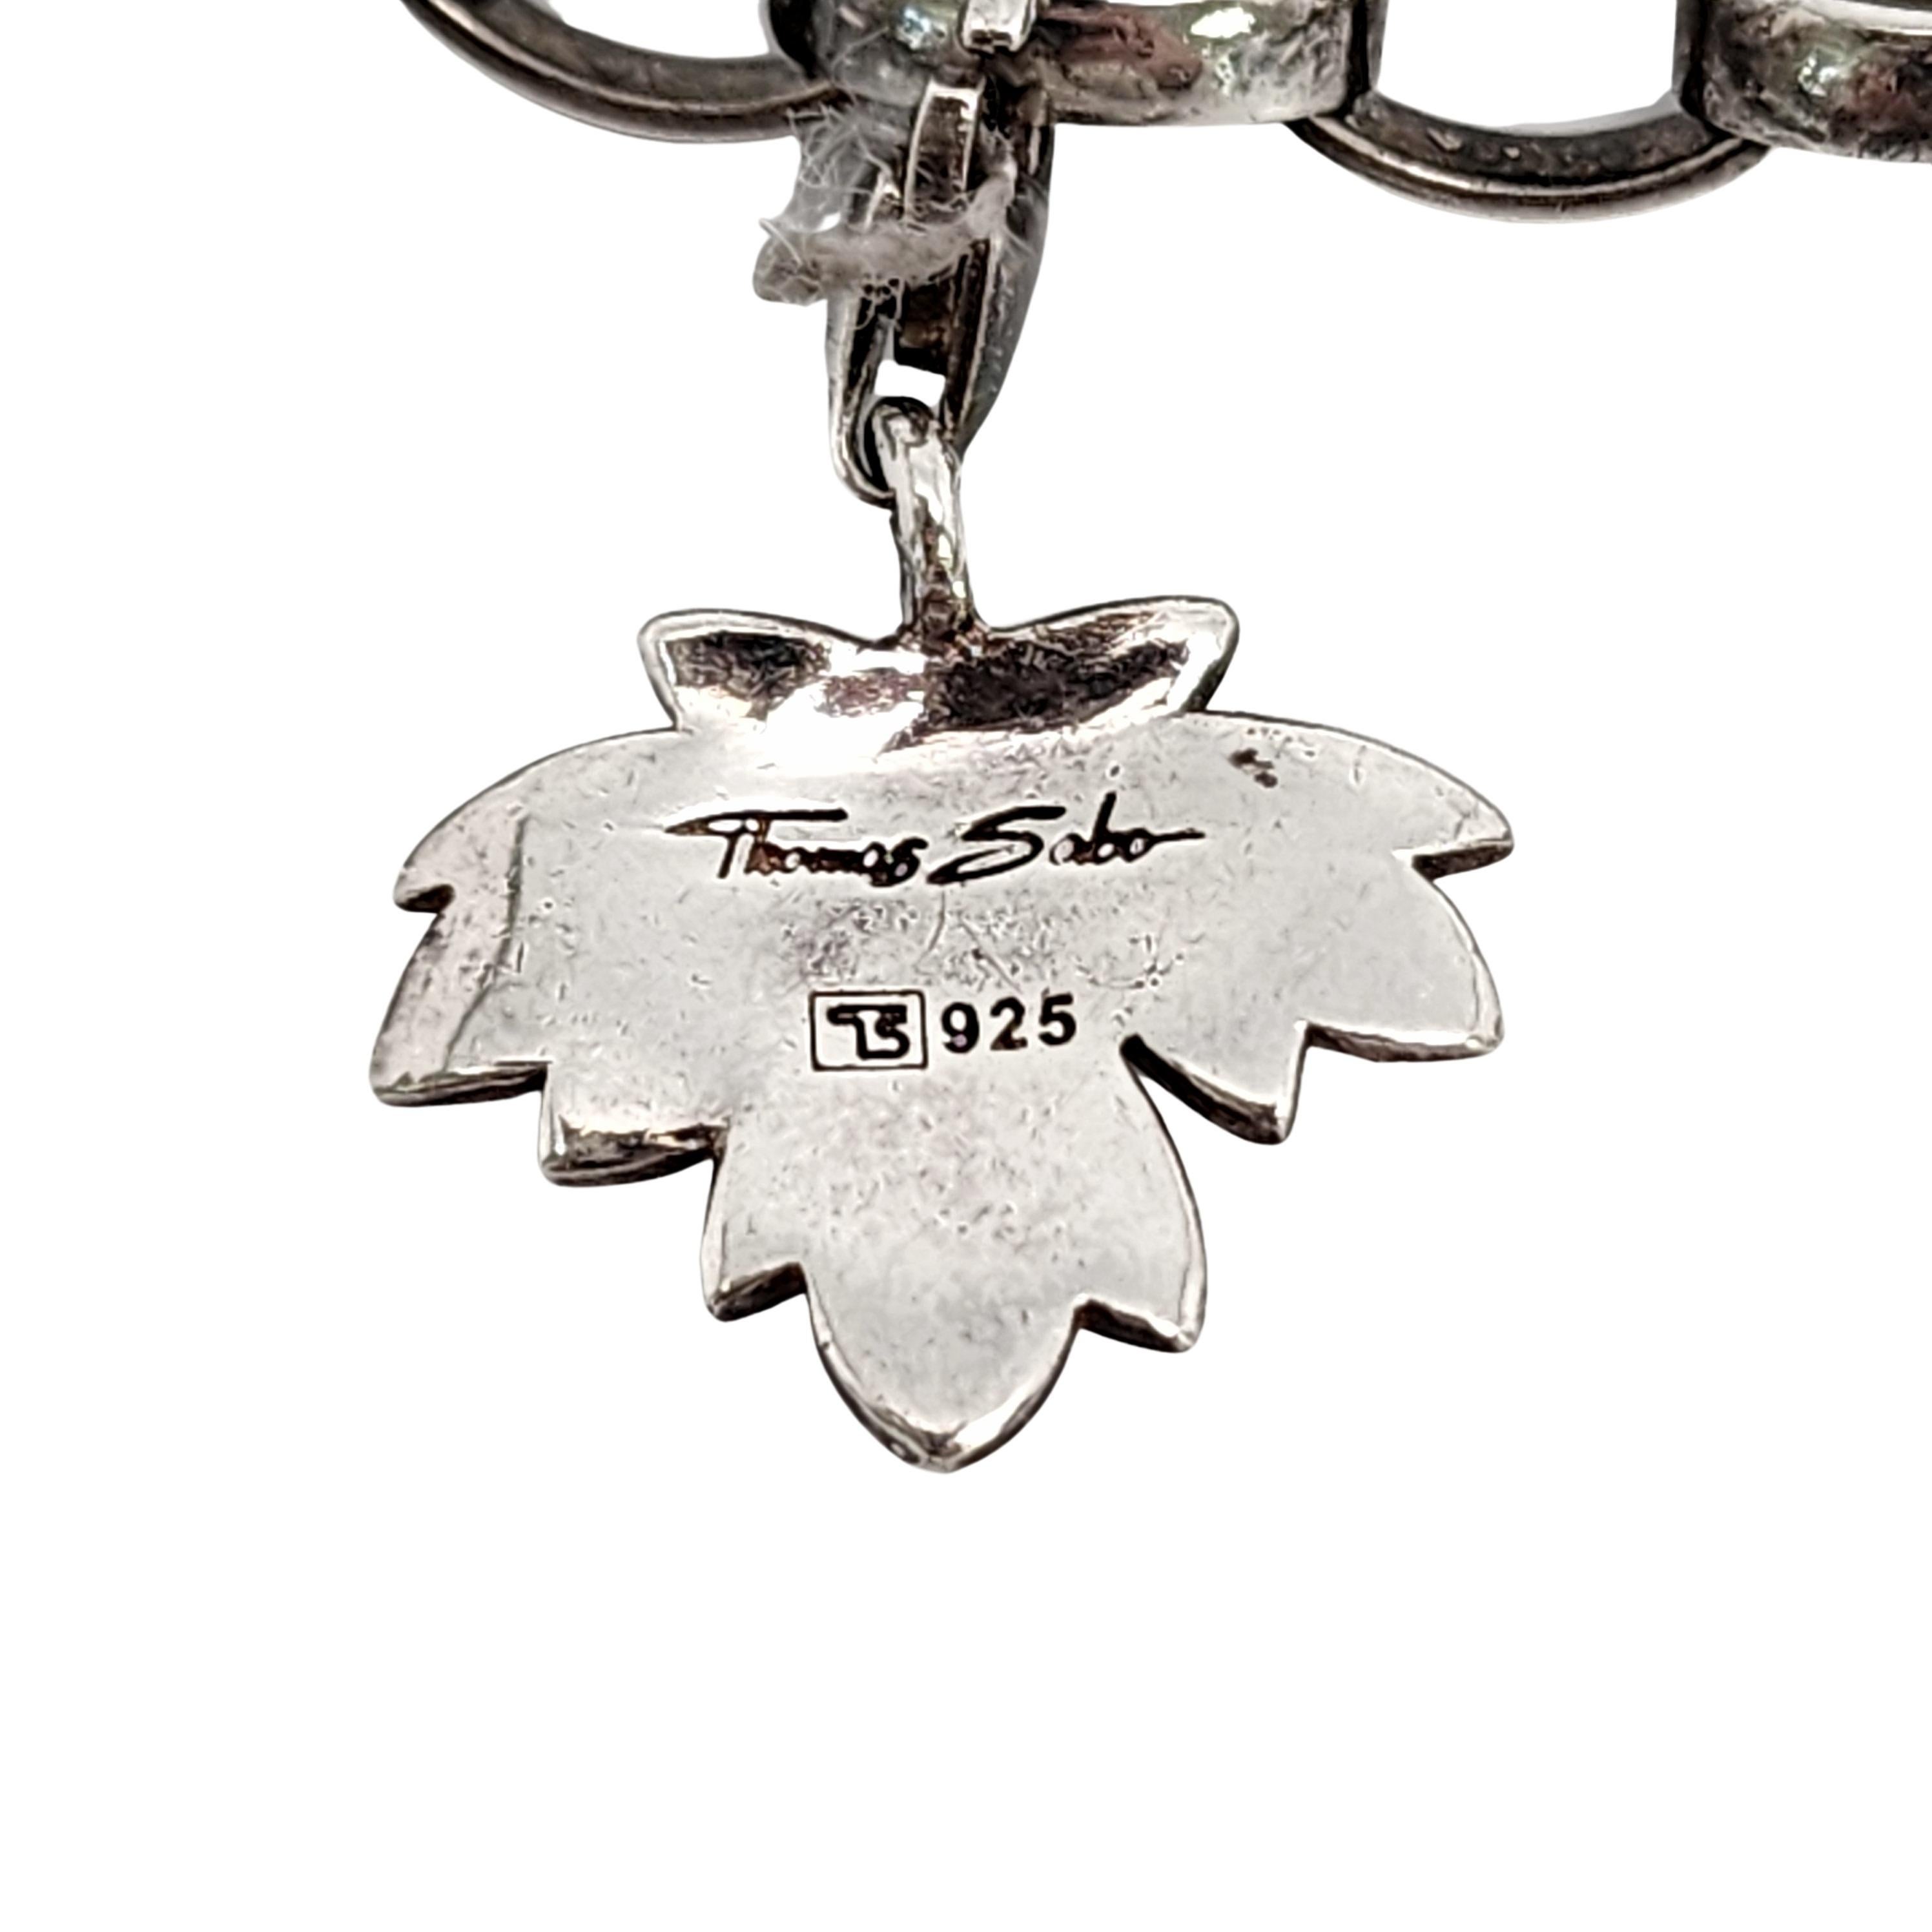 Thomas Sabo Charm Club SS Bracelet with Soccer Ball and Leaf Charms #14459 For Sale 4